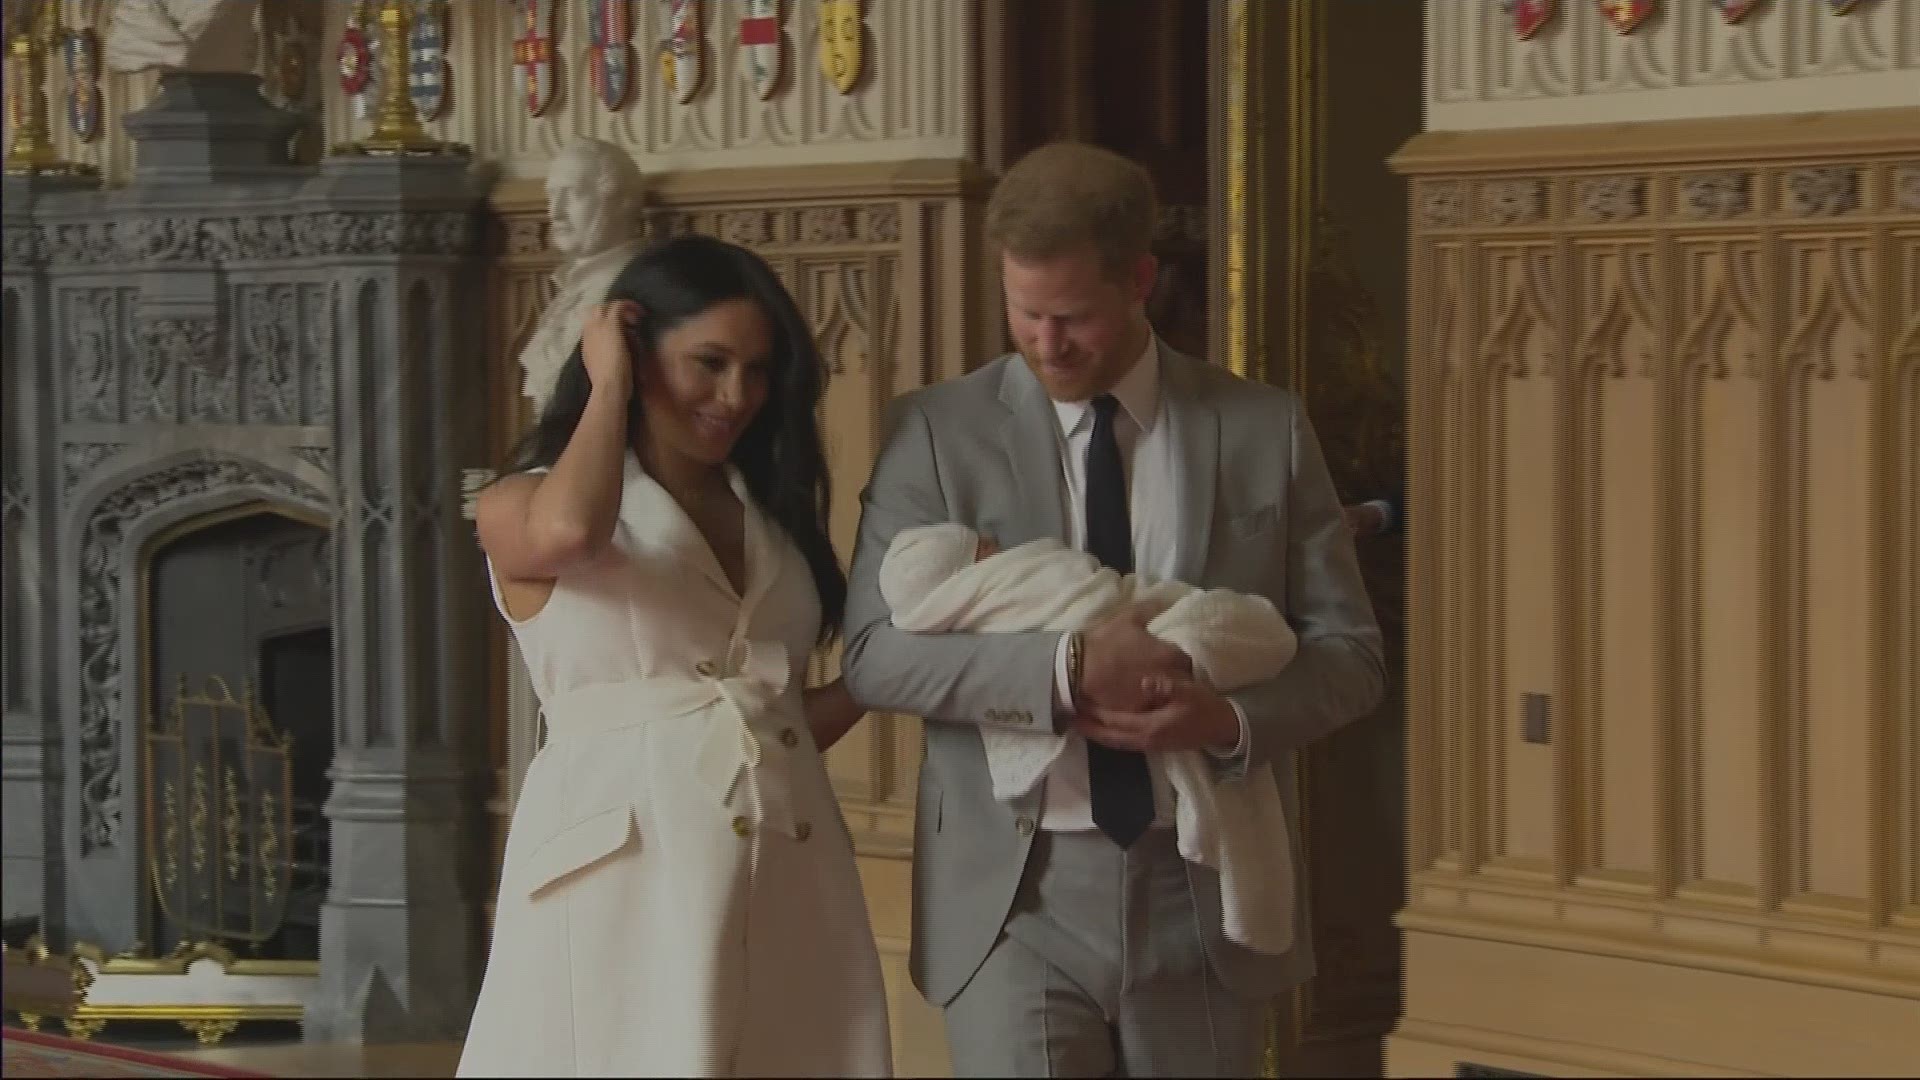 The Duke and Duchess of Sussex presented their newborn son to the public and posed for photos at Windsor Palace.